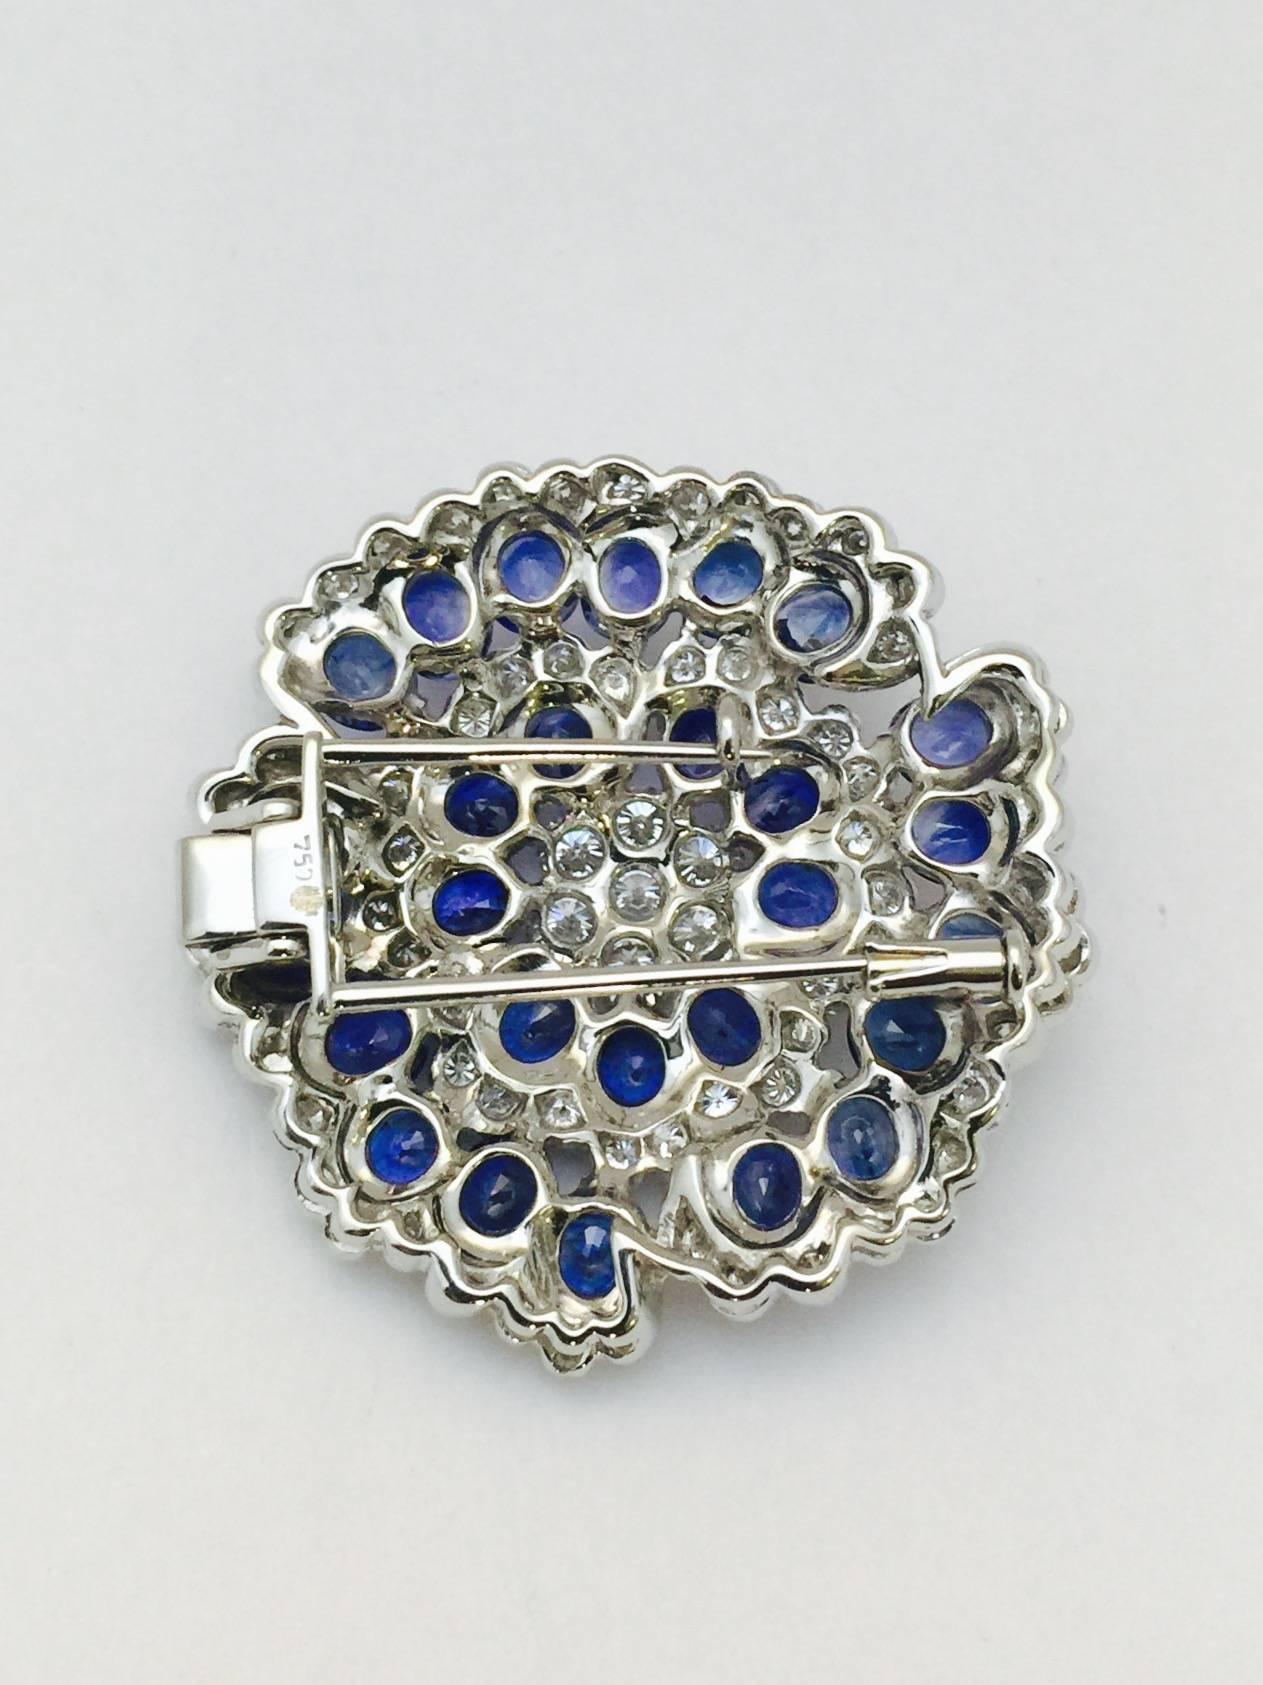  this breathtaking brooch is beyond description.   We present this 1.50" diameter brooch fabricated in 18 karat white gold.  Perfectly matched oval Ceylon sapphires, with a total weight of 16.70 carats, pair beautifully with white brilliant cut